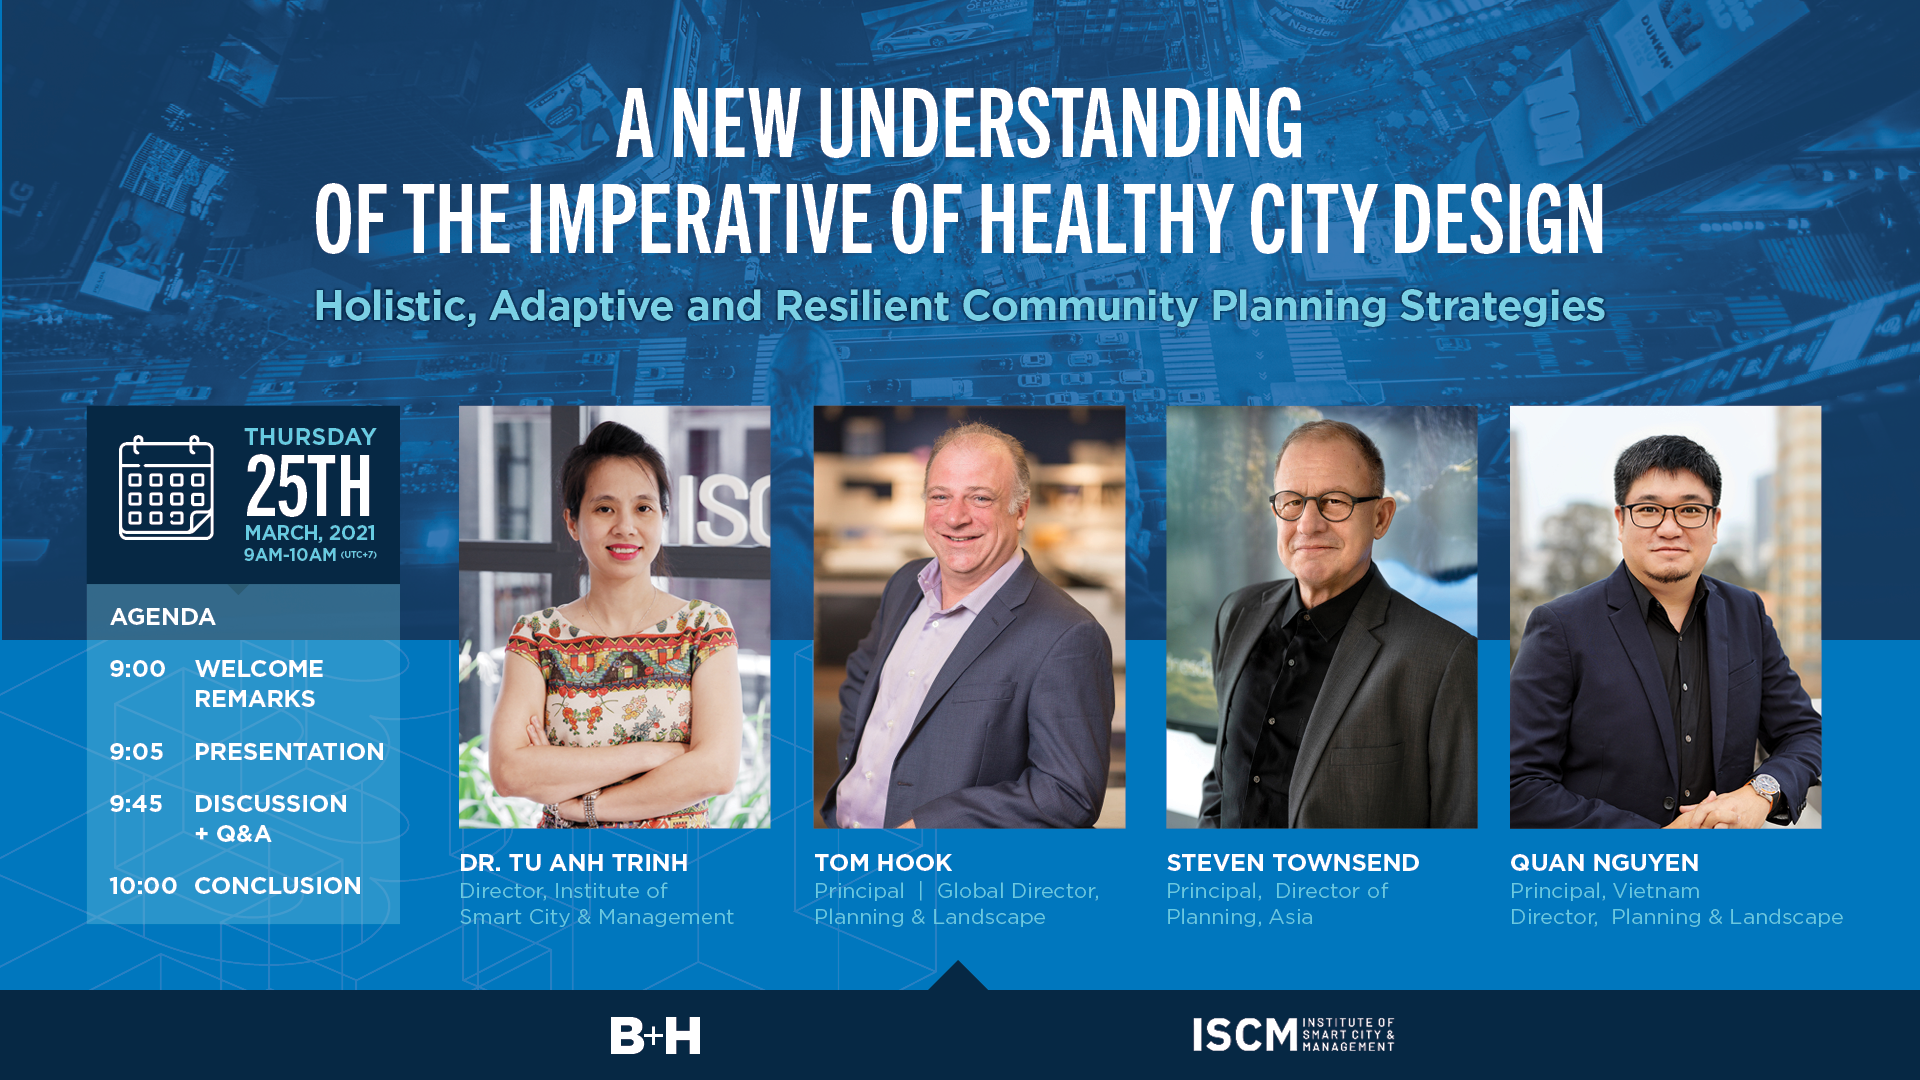 Hội Thảo Trực Tuyến “A New Understanding of the Imperative of Healthy City Design”